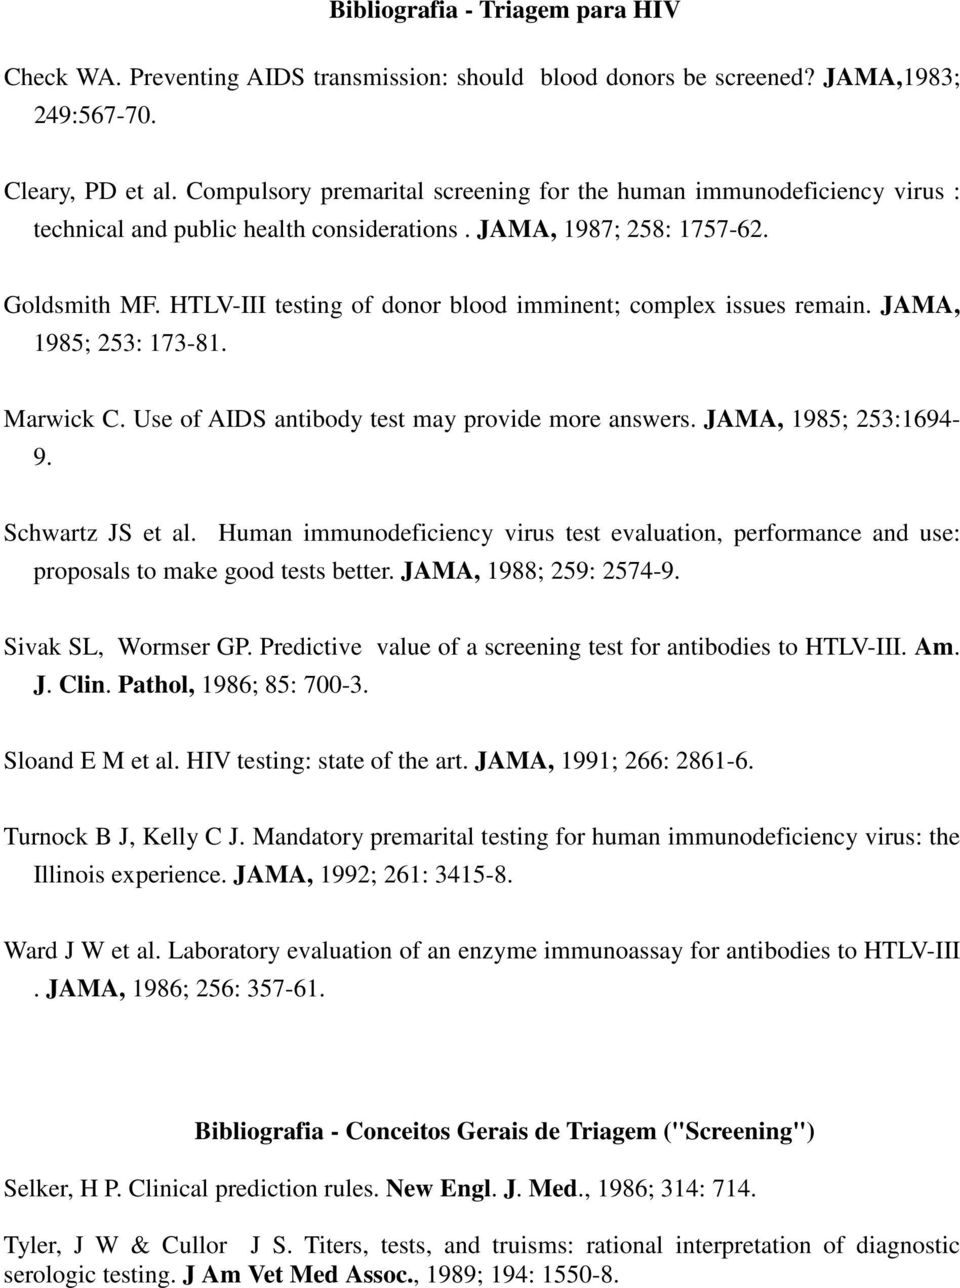 HTLV-III testing of donor blood imminent; complex issues remain. JAMA, 1985; 253: 173-81. Marwick C. Use of AIDS antibody test may provide more answers. JAMA, 1985; 253:1694-9. Schwartz JS et al.